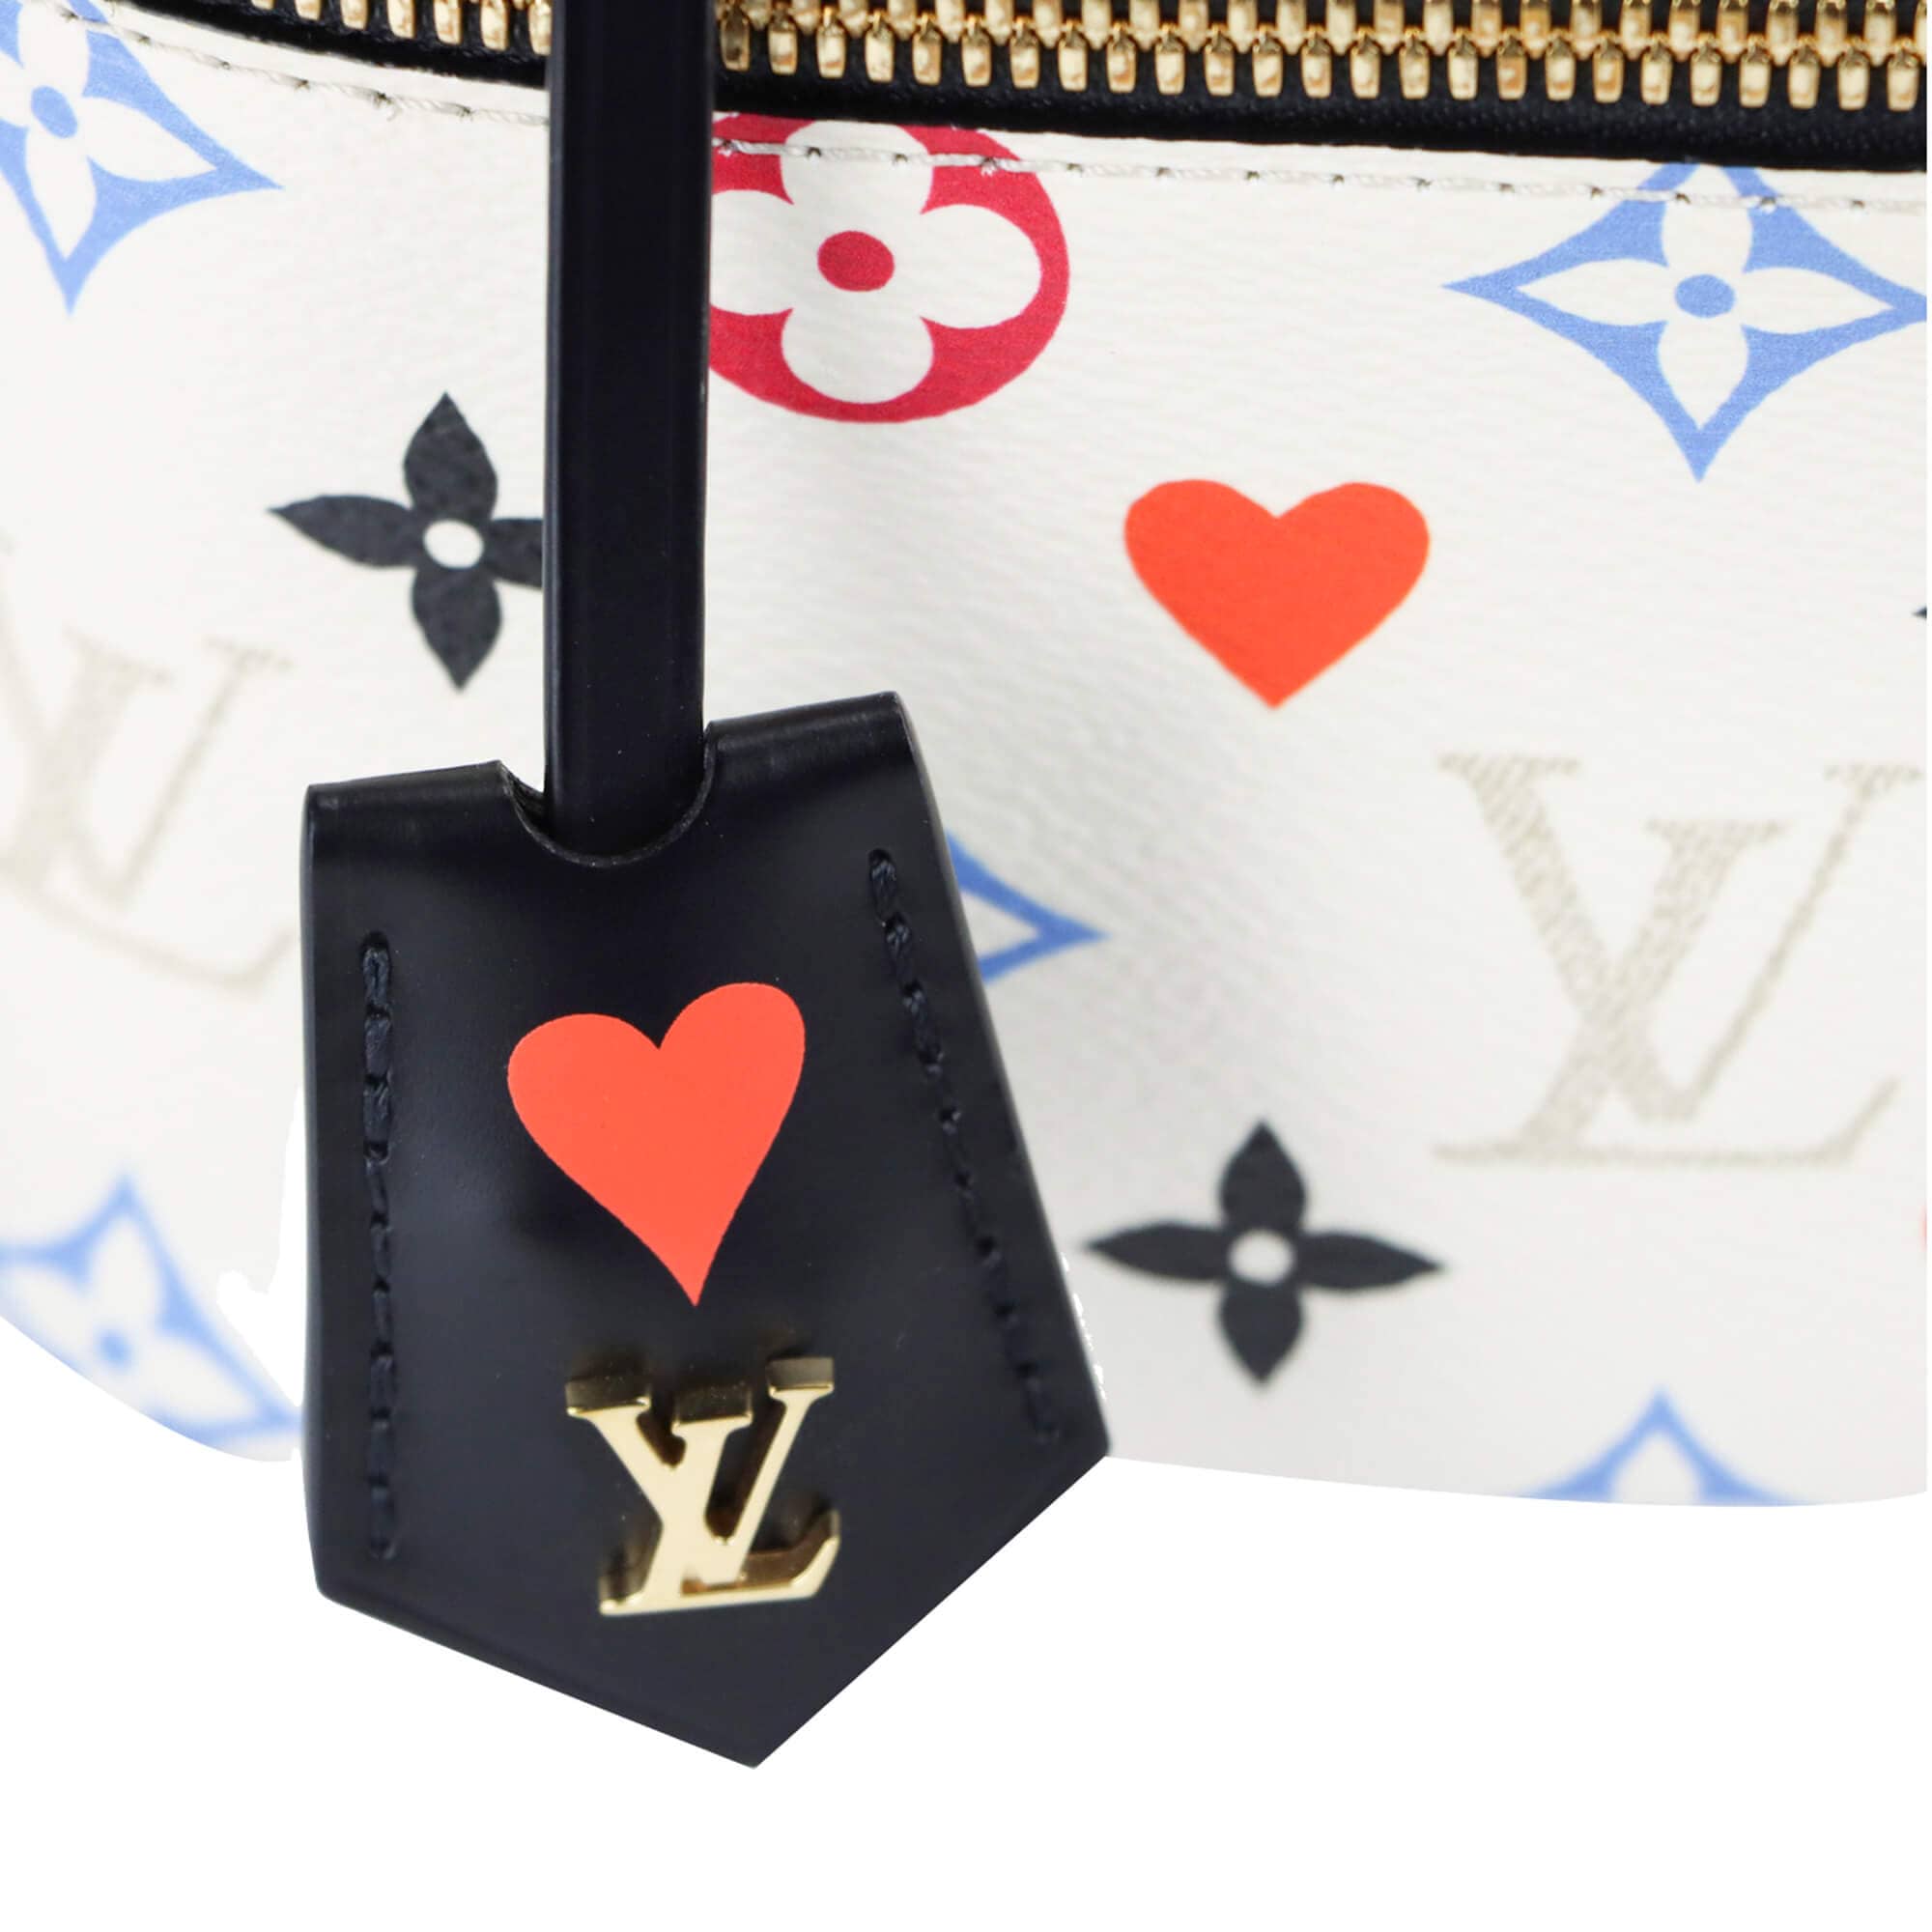 Louis Vuitton Game On Paper Bags